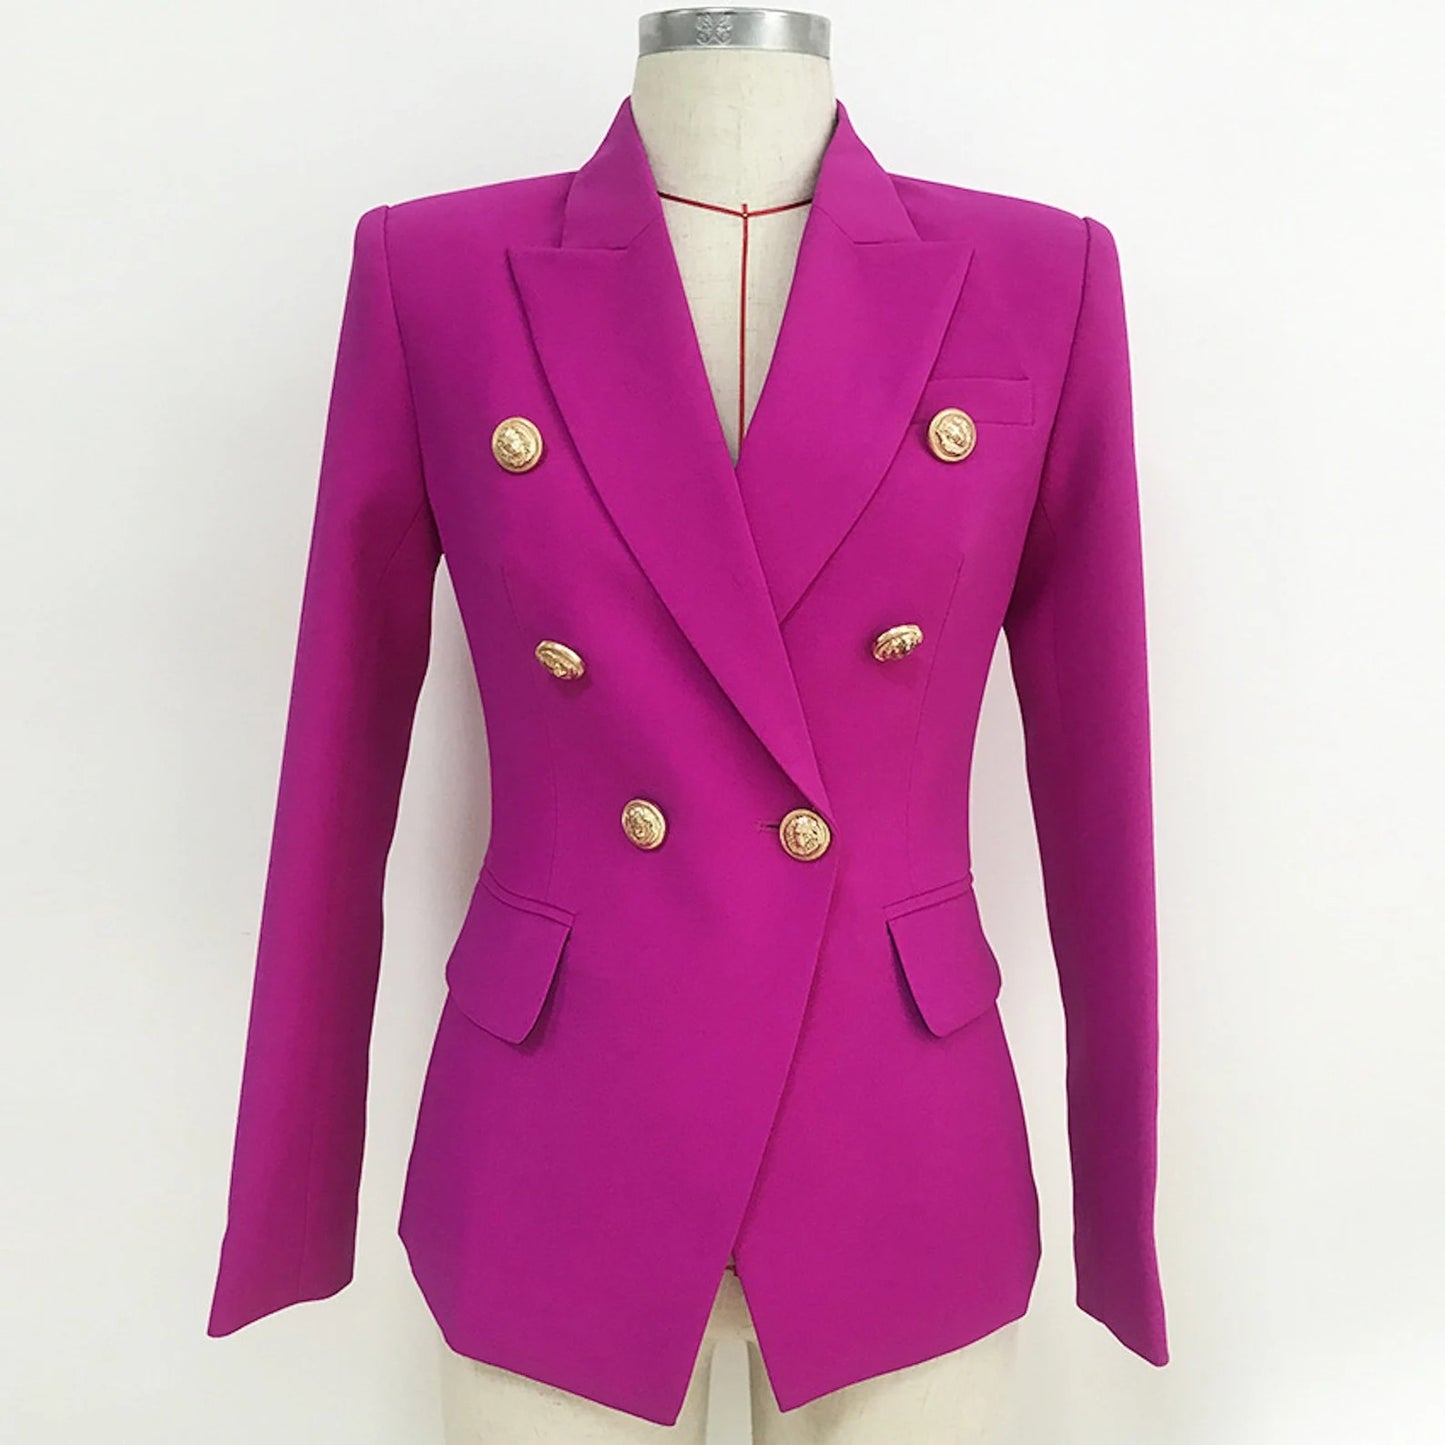 Purple Women's Luxury Fitted Blazer Golden Lion Buttons Coat - Blazer can wear for professional use, formal wear, business use and evening out match with white pant and and inner white T-shirt or shirt. Soft, light and stretchy. This jacket comes with a full lining, soft and comfortable to Wear. Slim fit and long Sleeves with buttons ,Belted and two pockets.